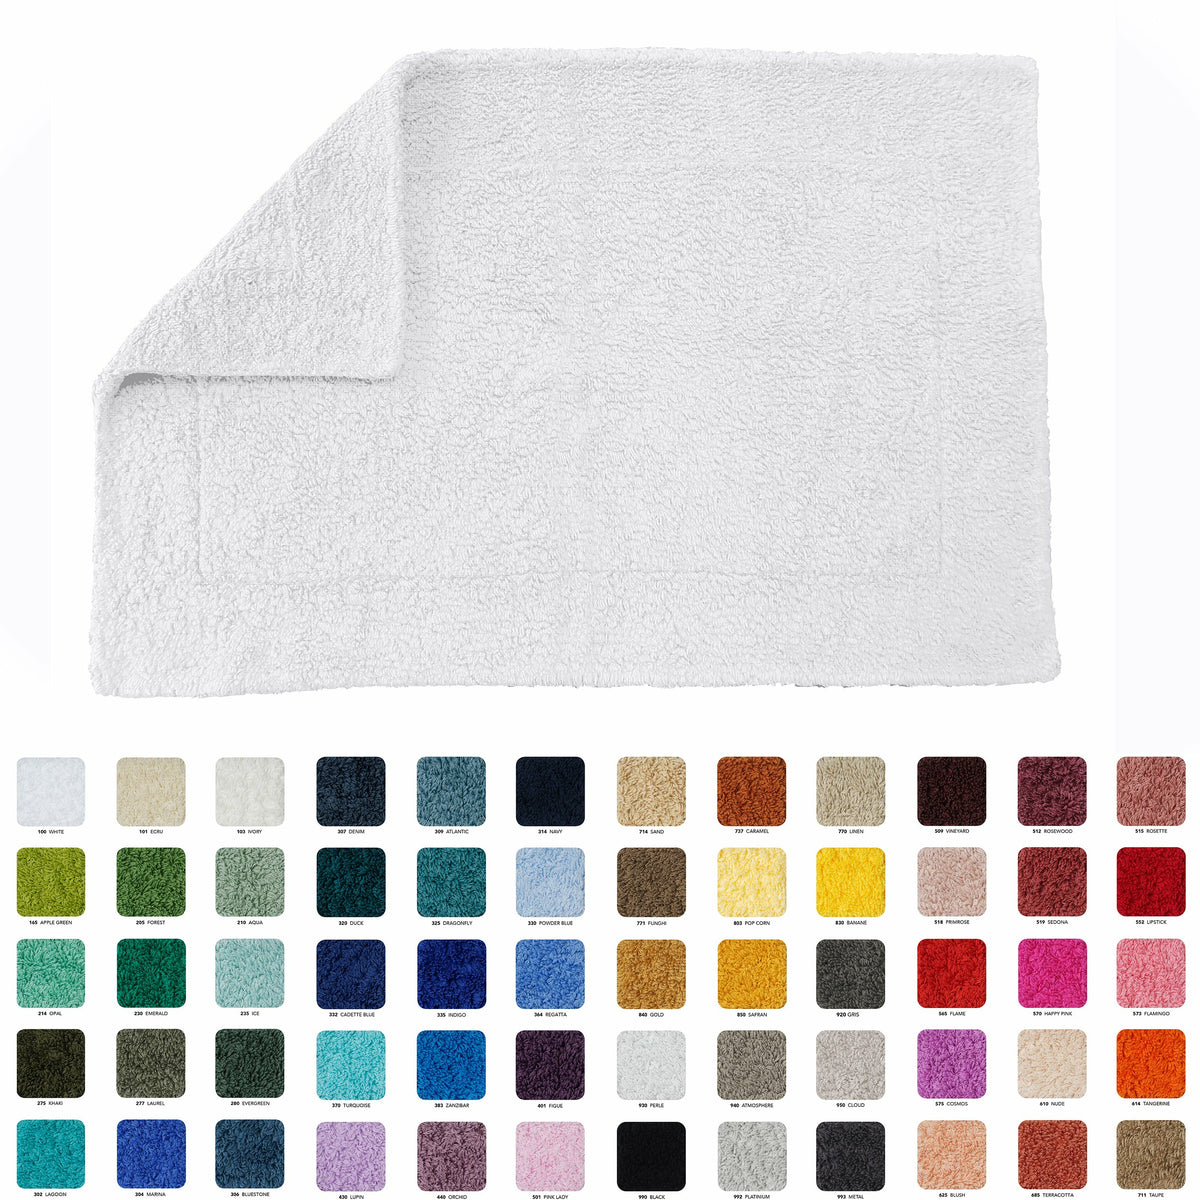 Abyss Double Bath Tub Mats from Portugal Available in 60 Color Options